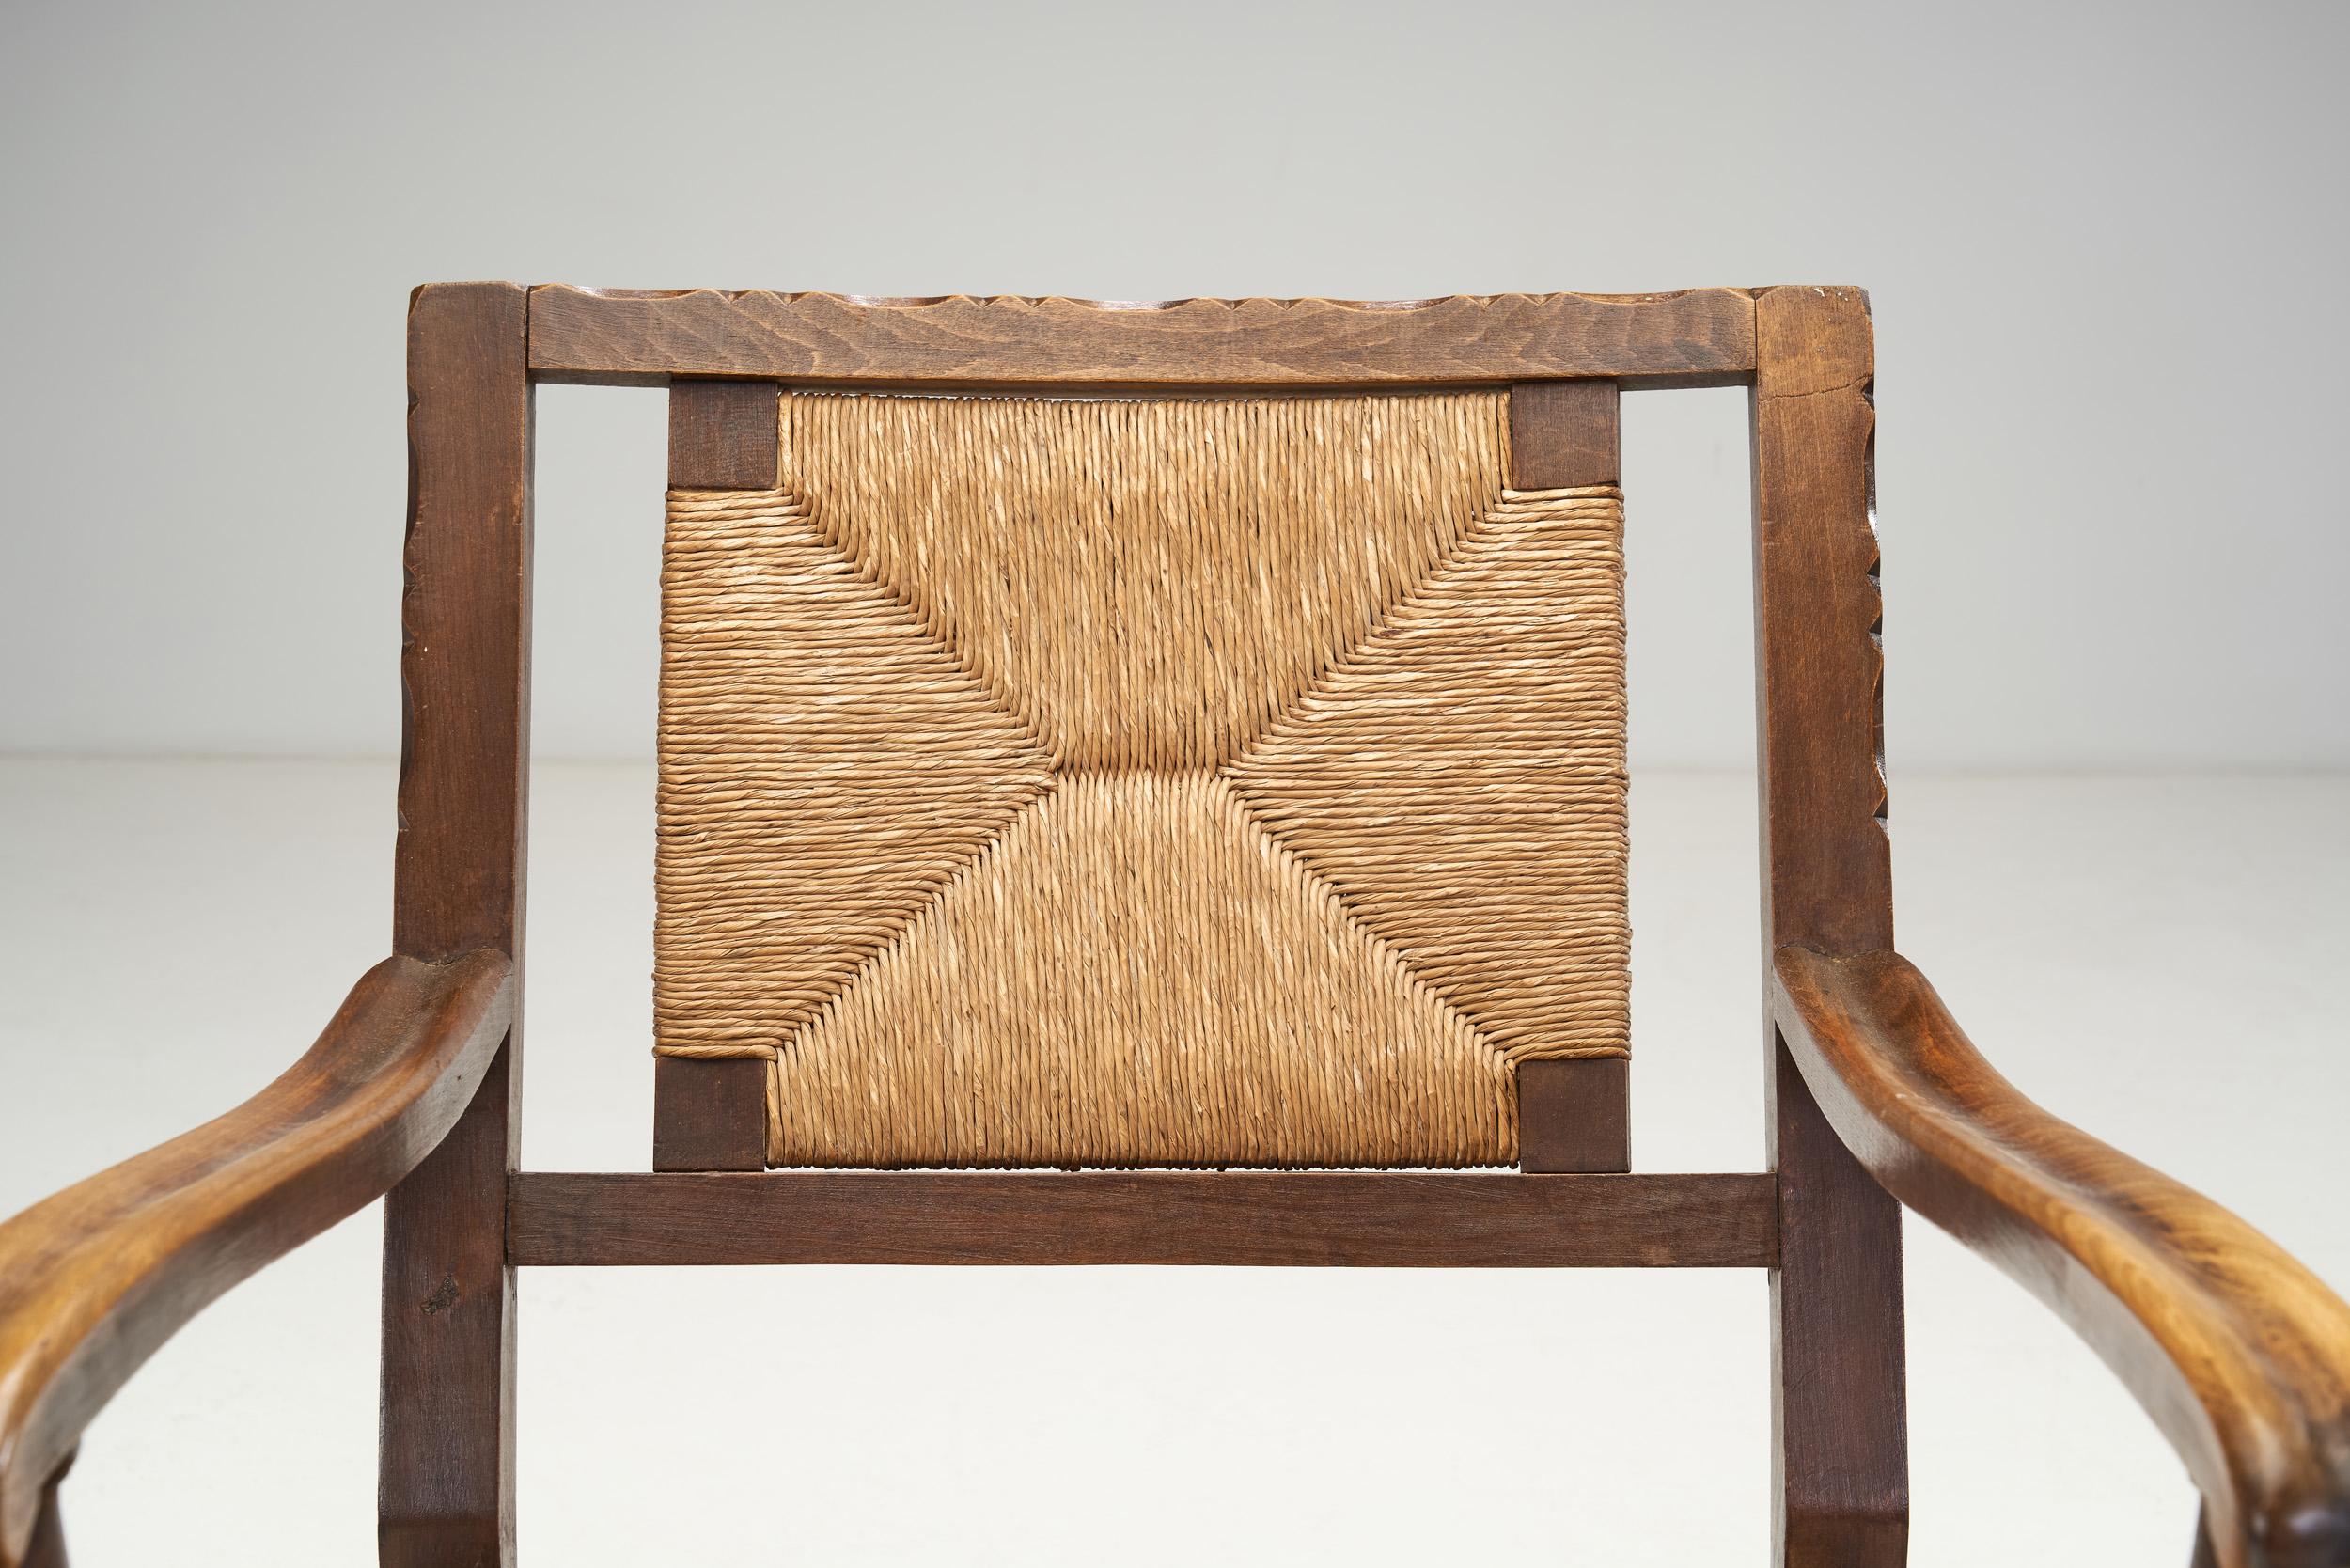 Mid-Century Handcrafted Wood and Woven Straw Armchairs, Europe ca 1950s For Sale 1